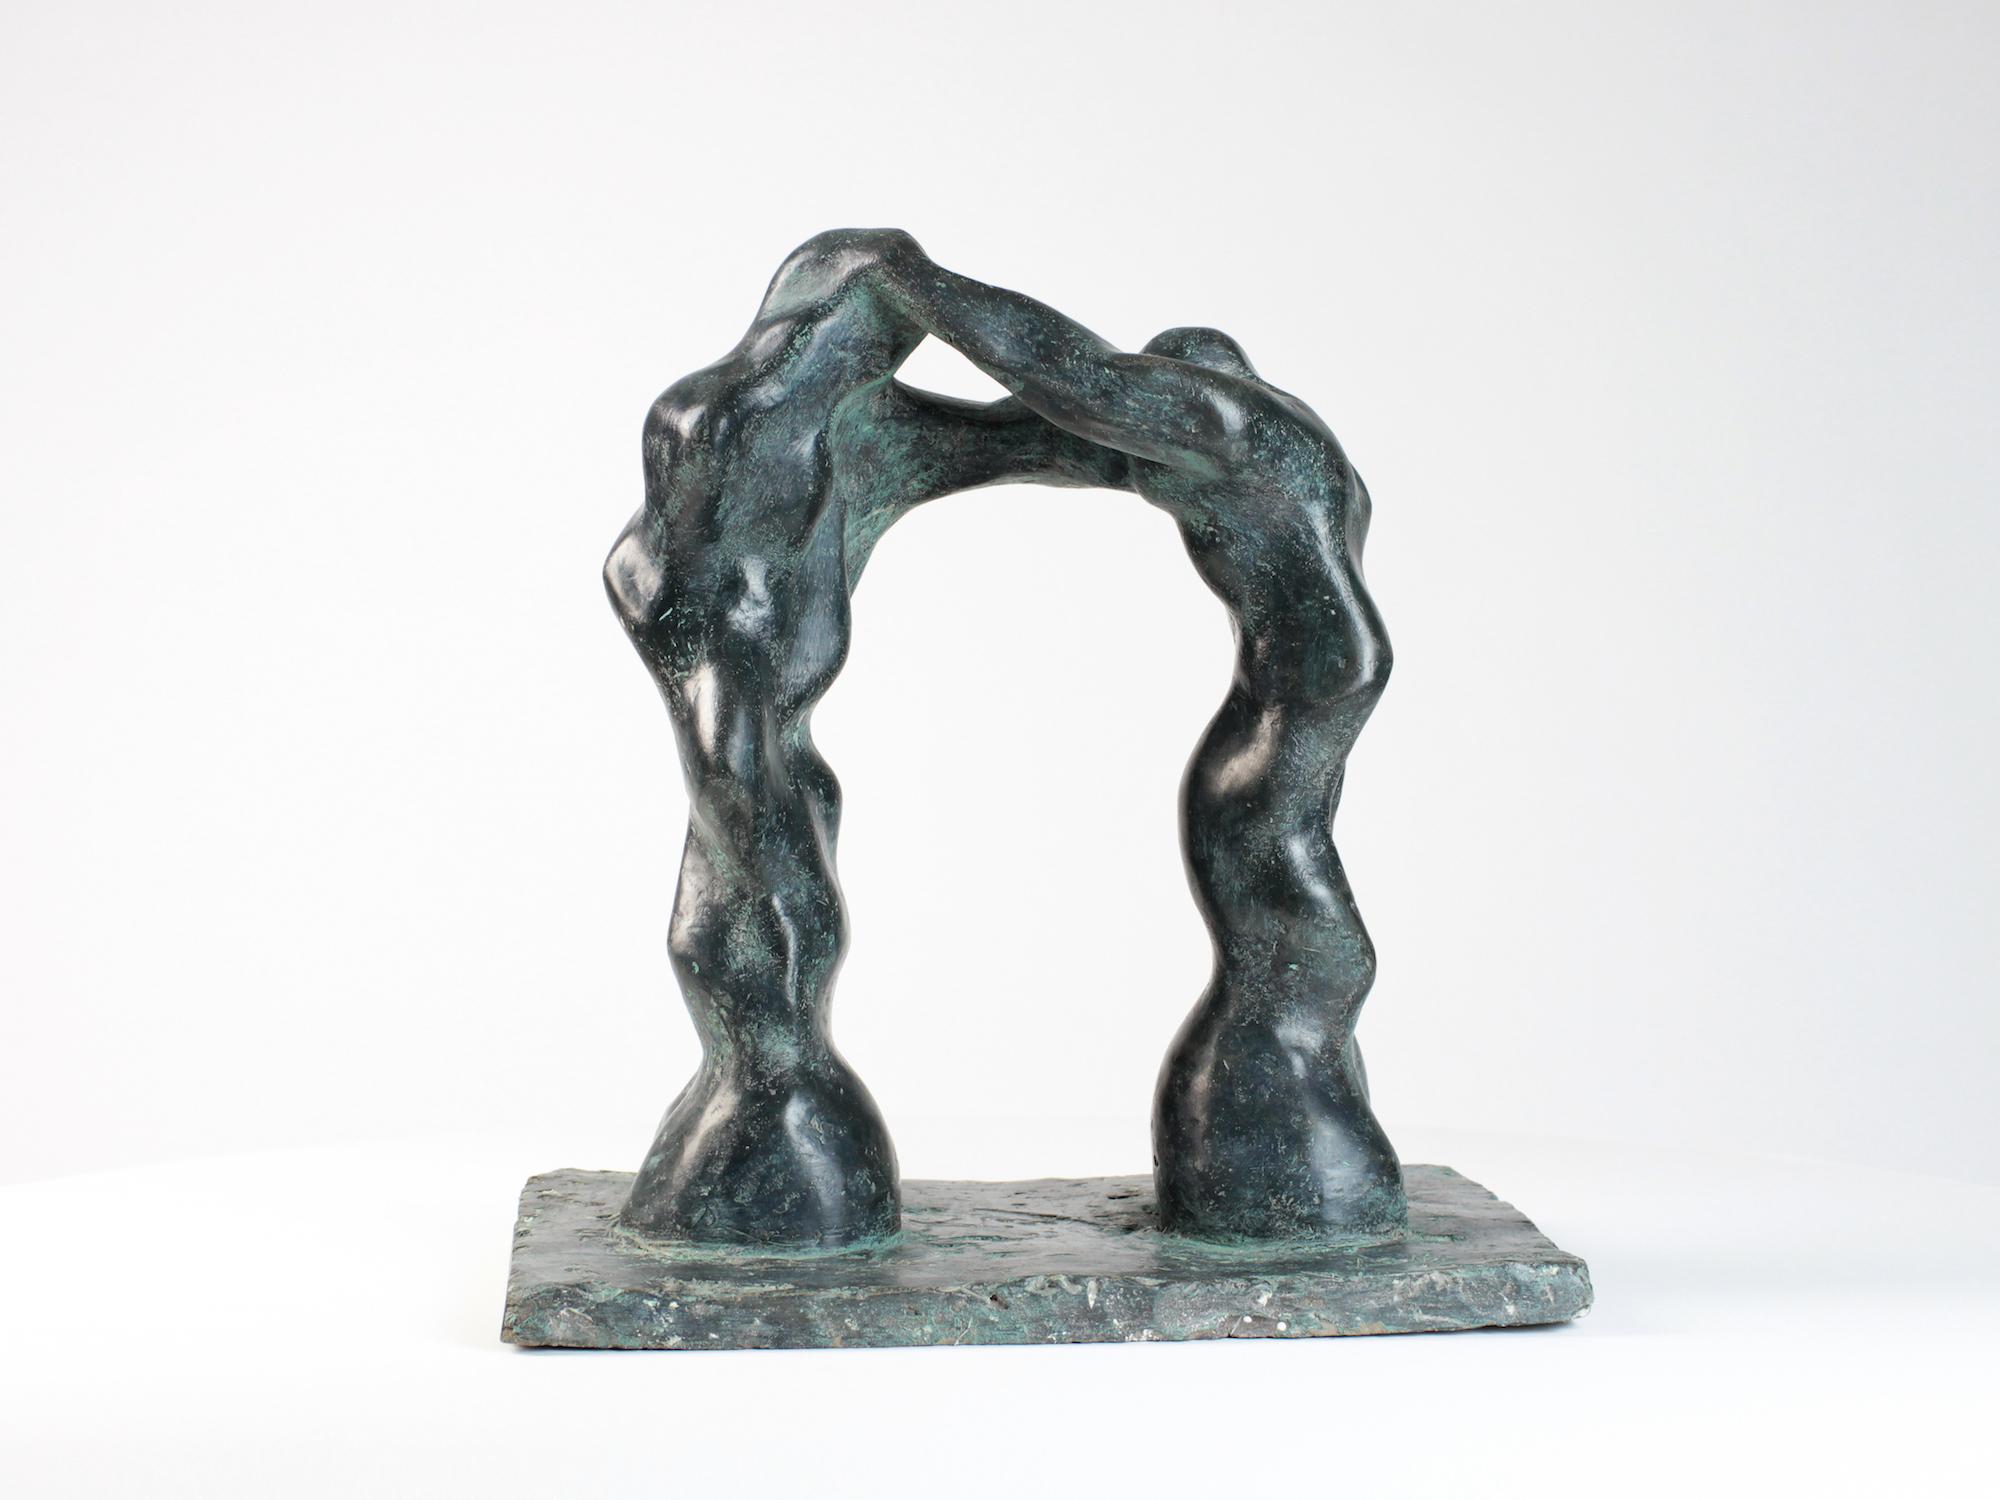 Large Arch is a bronze sculpture by contemporary artist Yann Guillon, dimensions are 40 × 25 × 15 cm (15.7 × 9.8 × 5.9 in).
The sculpture is signed and numbered, it is part of a limited edition of 8 editions + 4 artist’s proofs, and comes with a